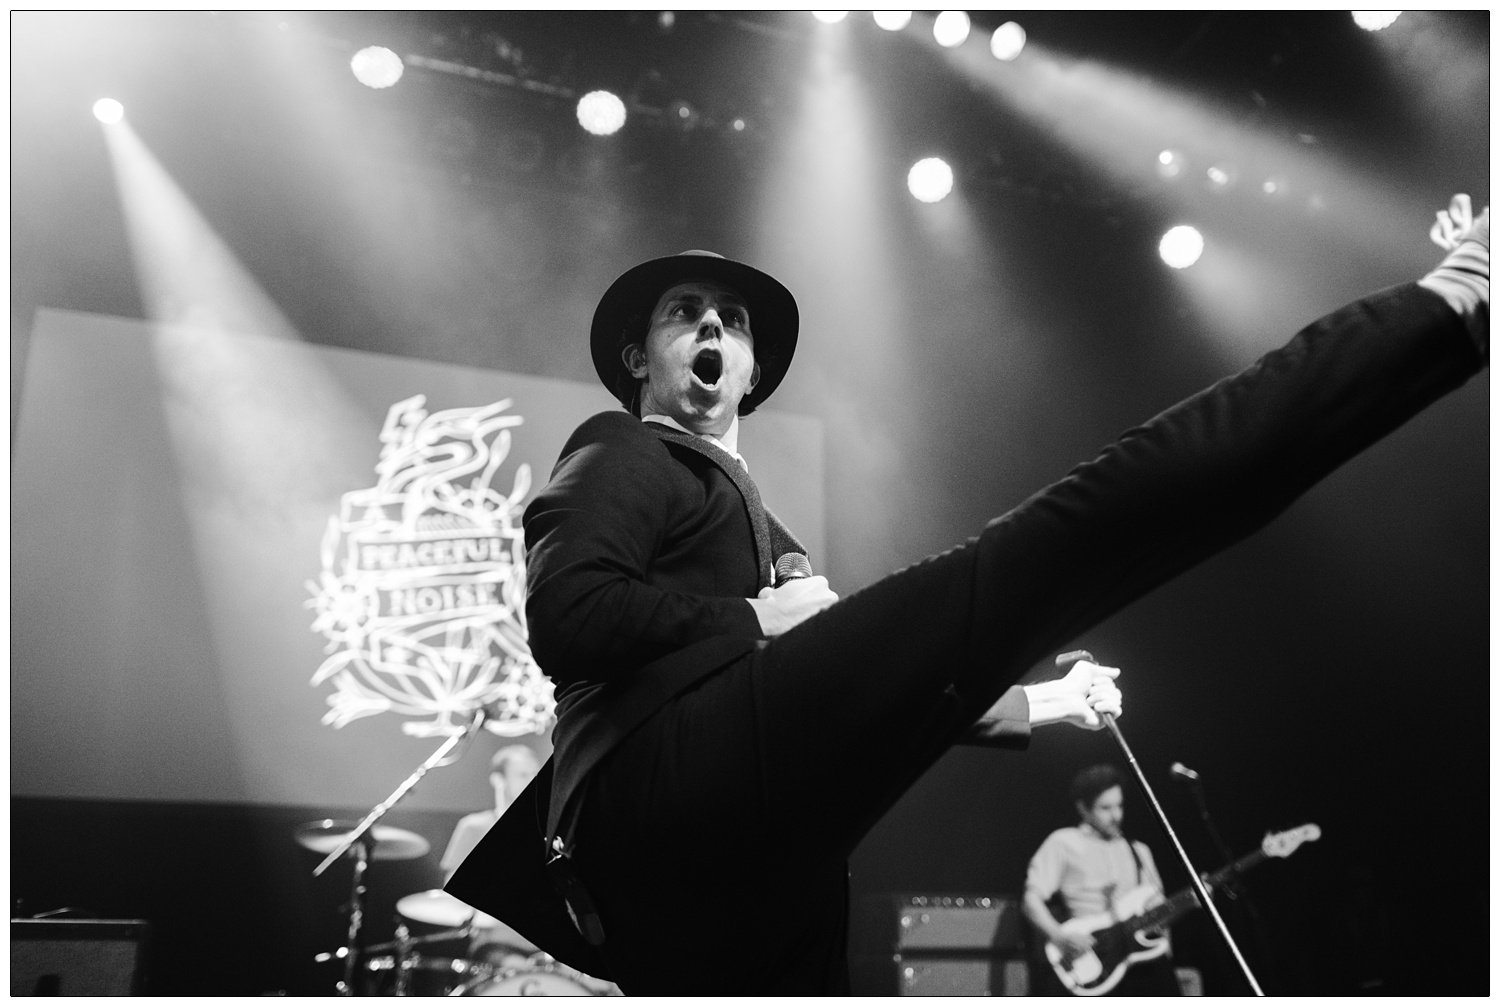 Black and white photograph of Paul Smith of Maxïmo Park kicking his leg in the air